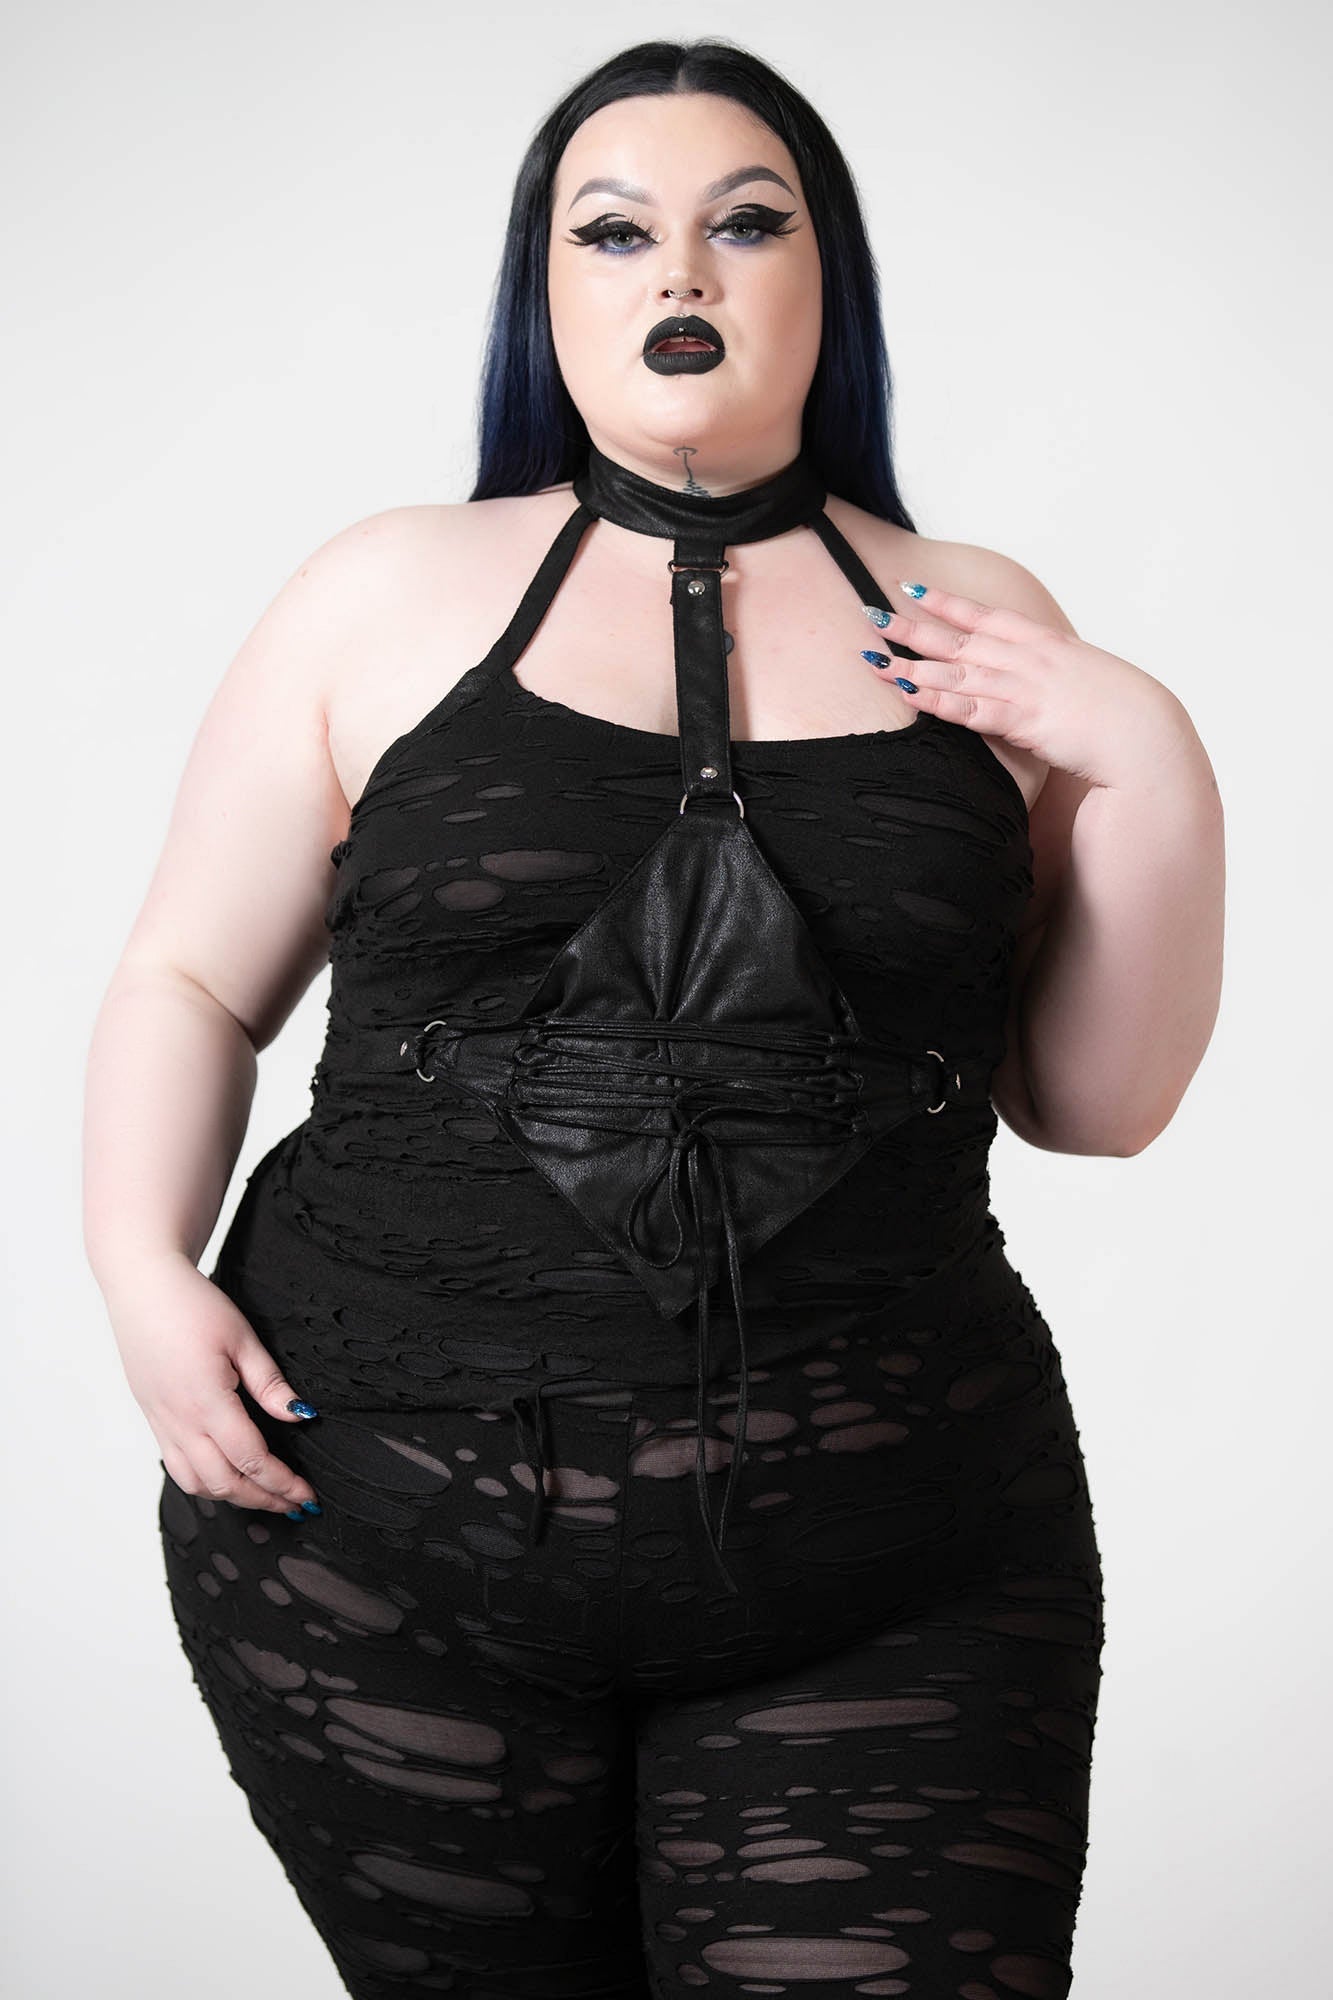 Is That The New Goth Women's Plus Size Lace Halter Bra ??